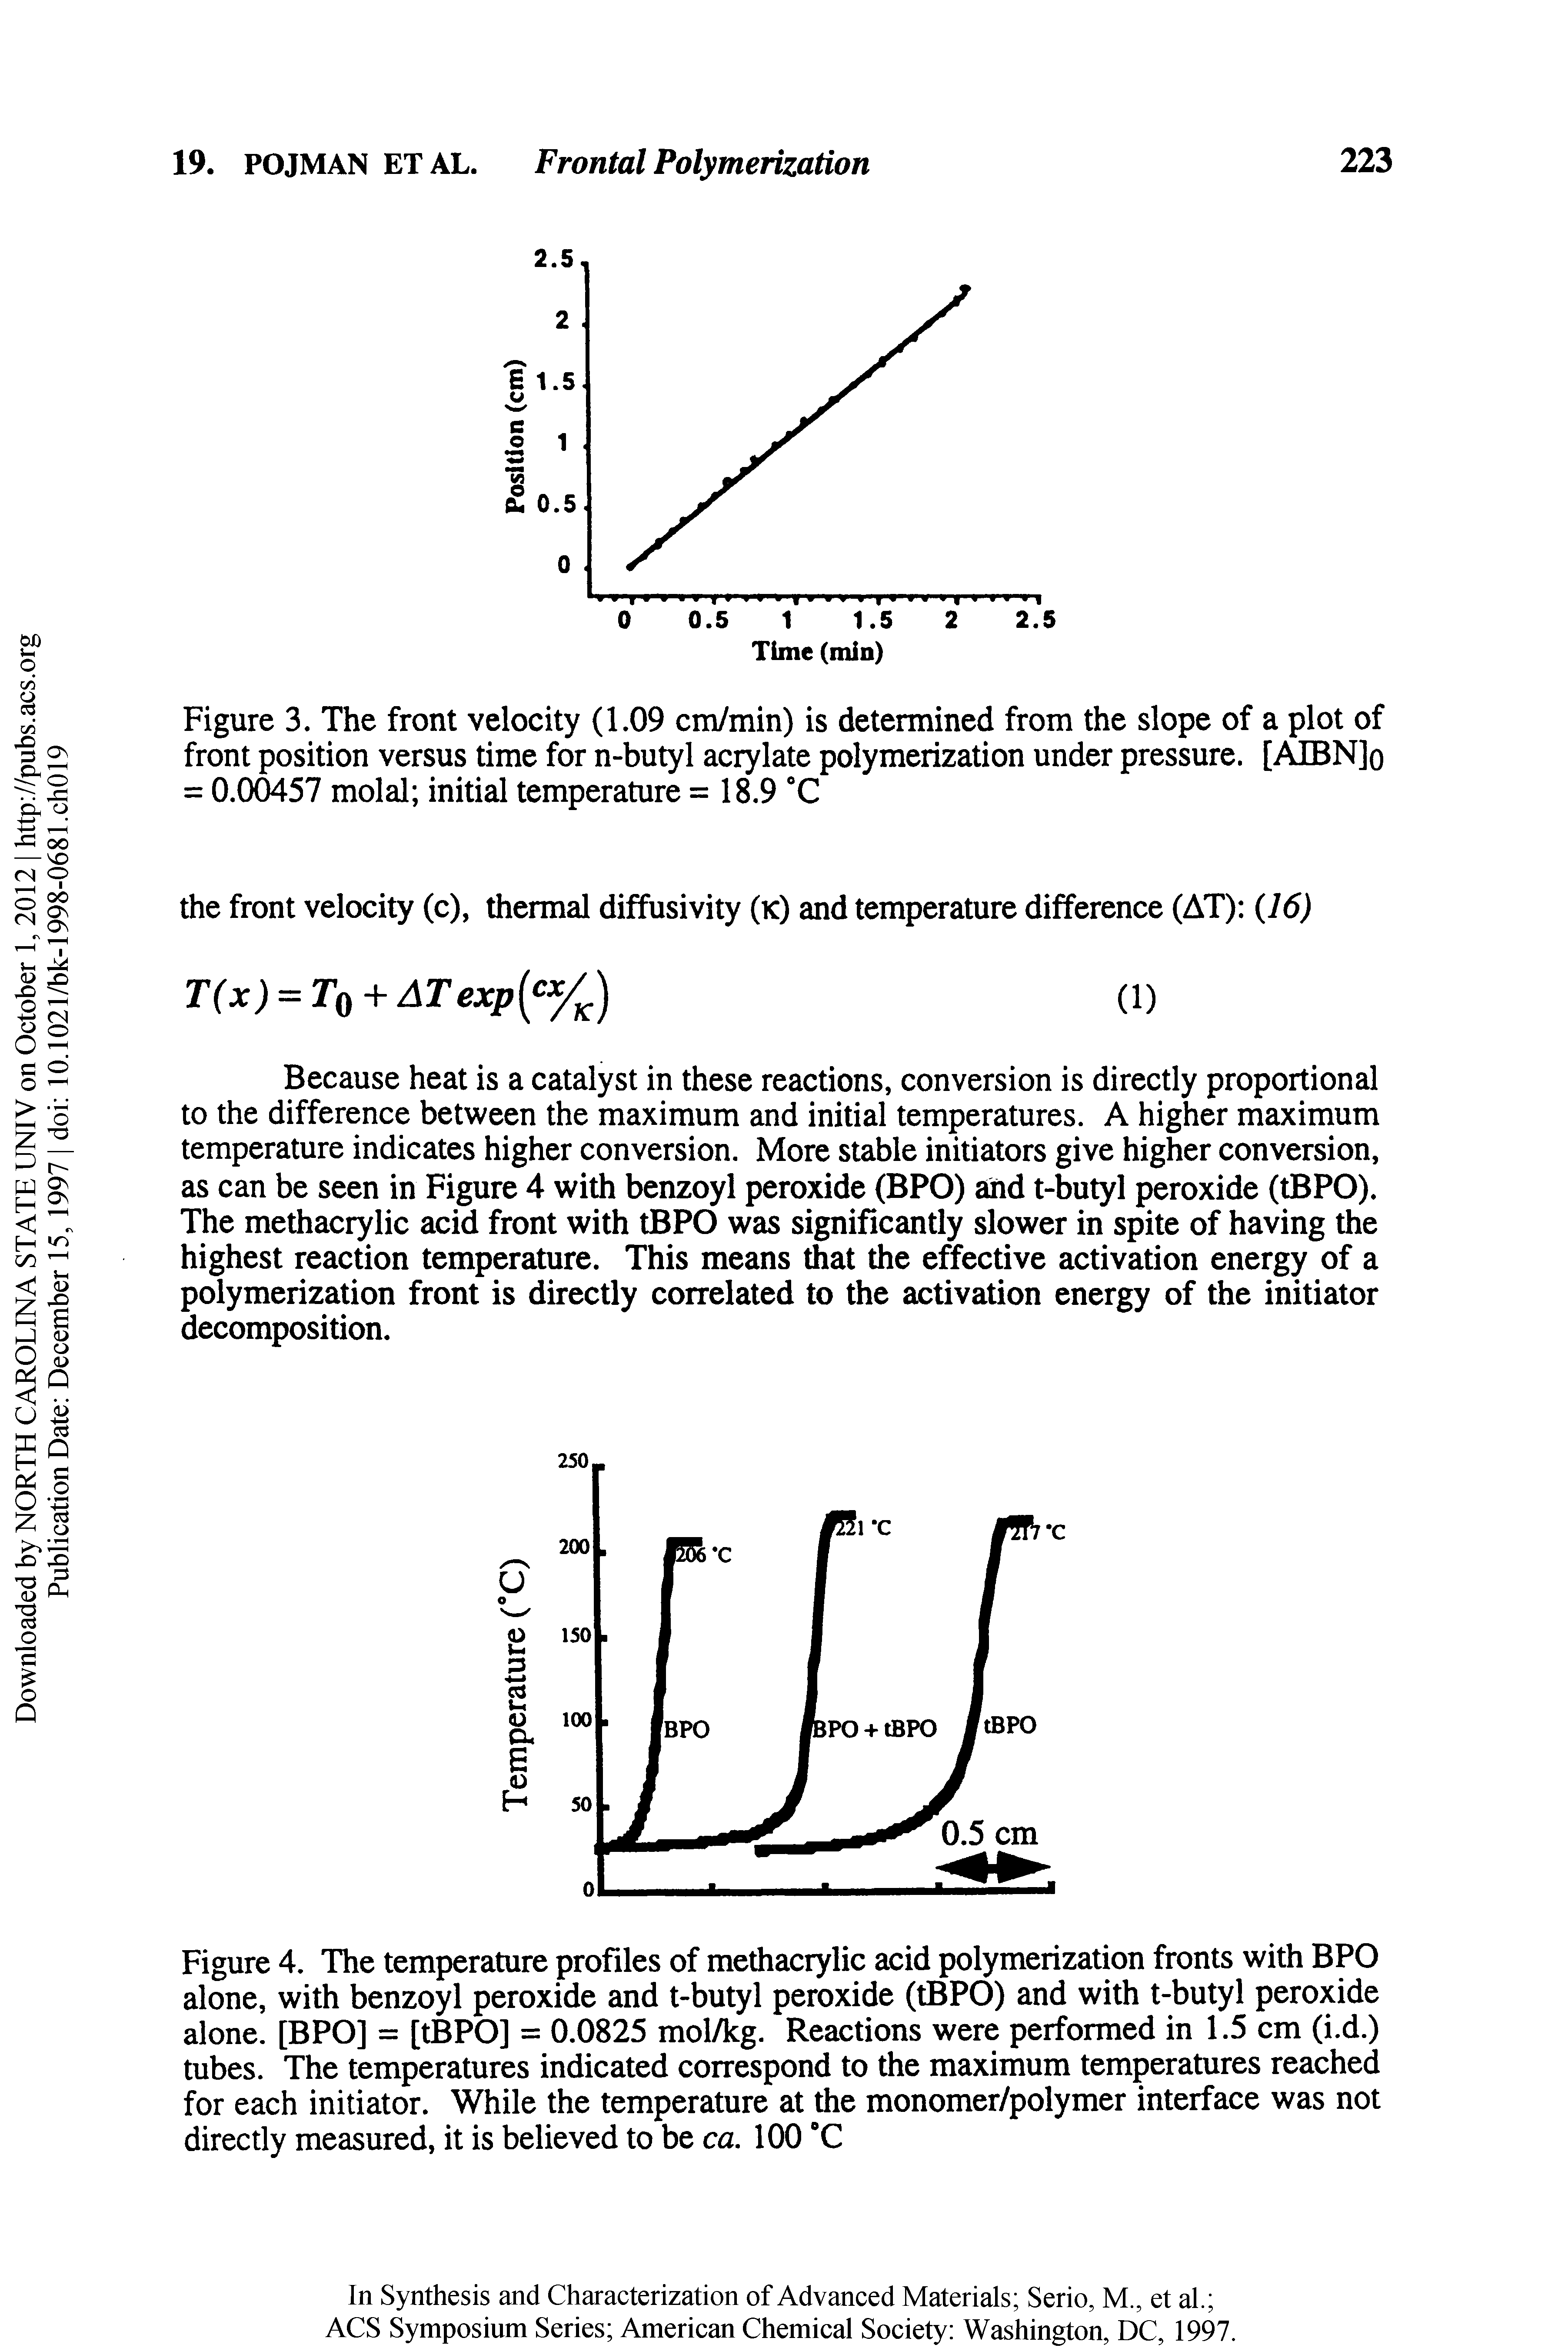 Figure 4. The temperature profiles of methacrylic acid polymerization fronts with BPO alone, with benzoyl peroxide and t-butyl peroxide (tBPO) and with t-butyl peroxide alone. [BPO] = [tBPO] = 0.0825 mol/kg. Reactions were performed in 1.5 cm (i.d.) tubes. The temperatures indicated correspond to the maximum temperatures reached for each initiator. While the temperature at the monomer/polymer interface was not directly measured, it is believed to be ca. 100 "C...